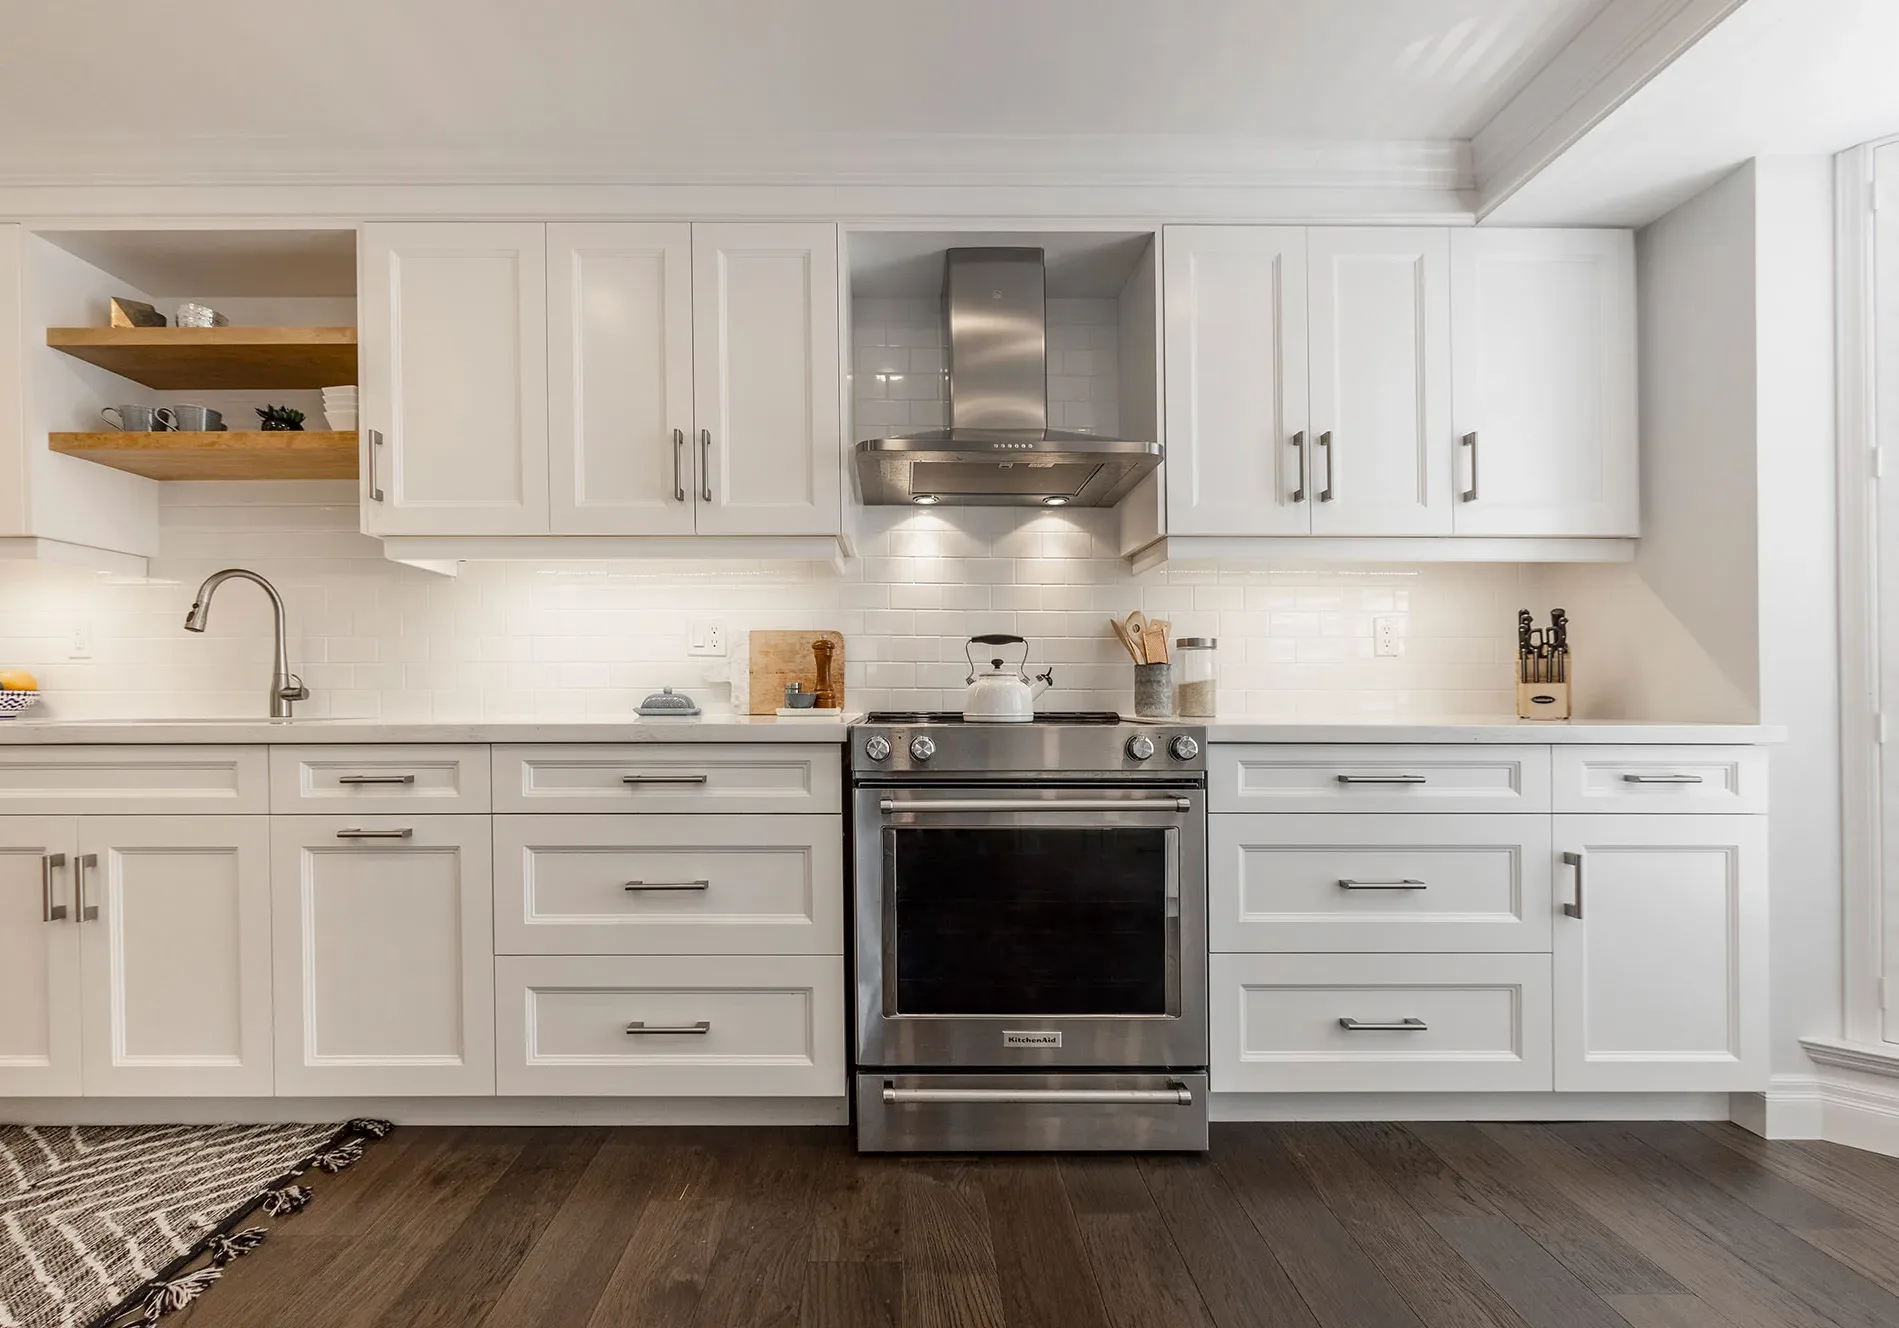 A modern kitchen with white cabinentry accented with silver handles and stainless steel stove and hood